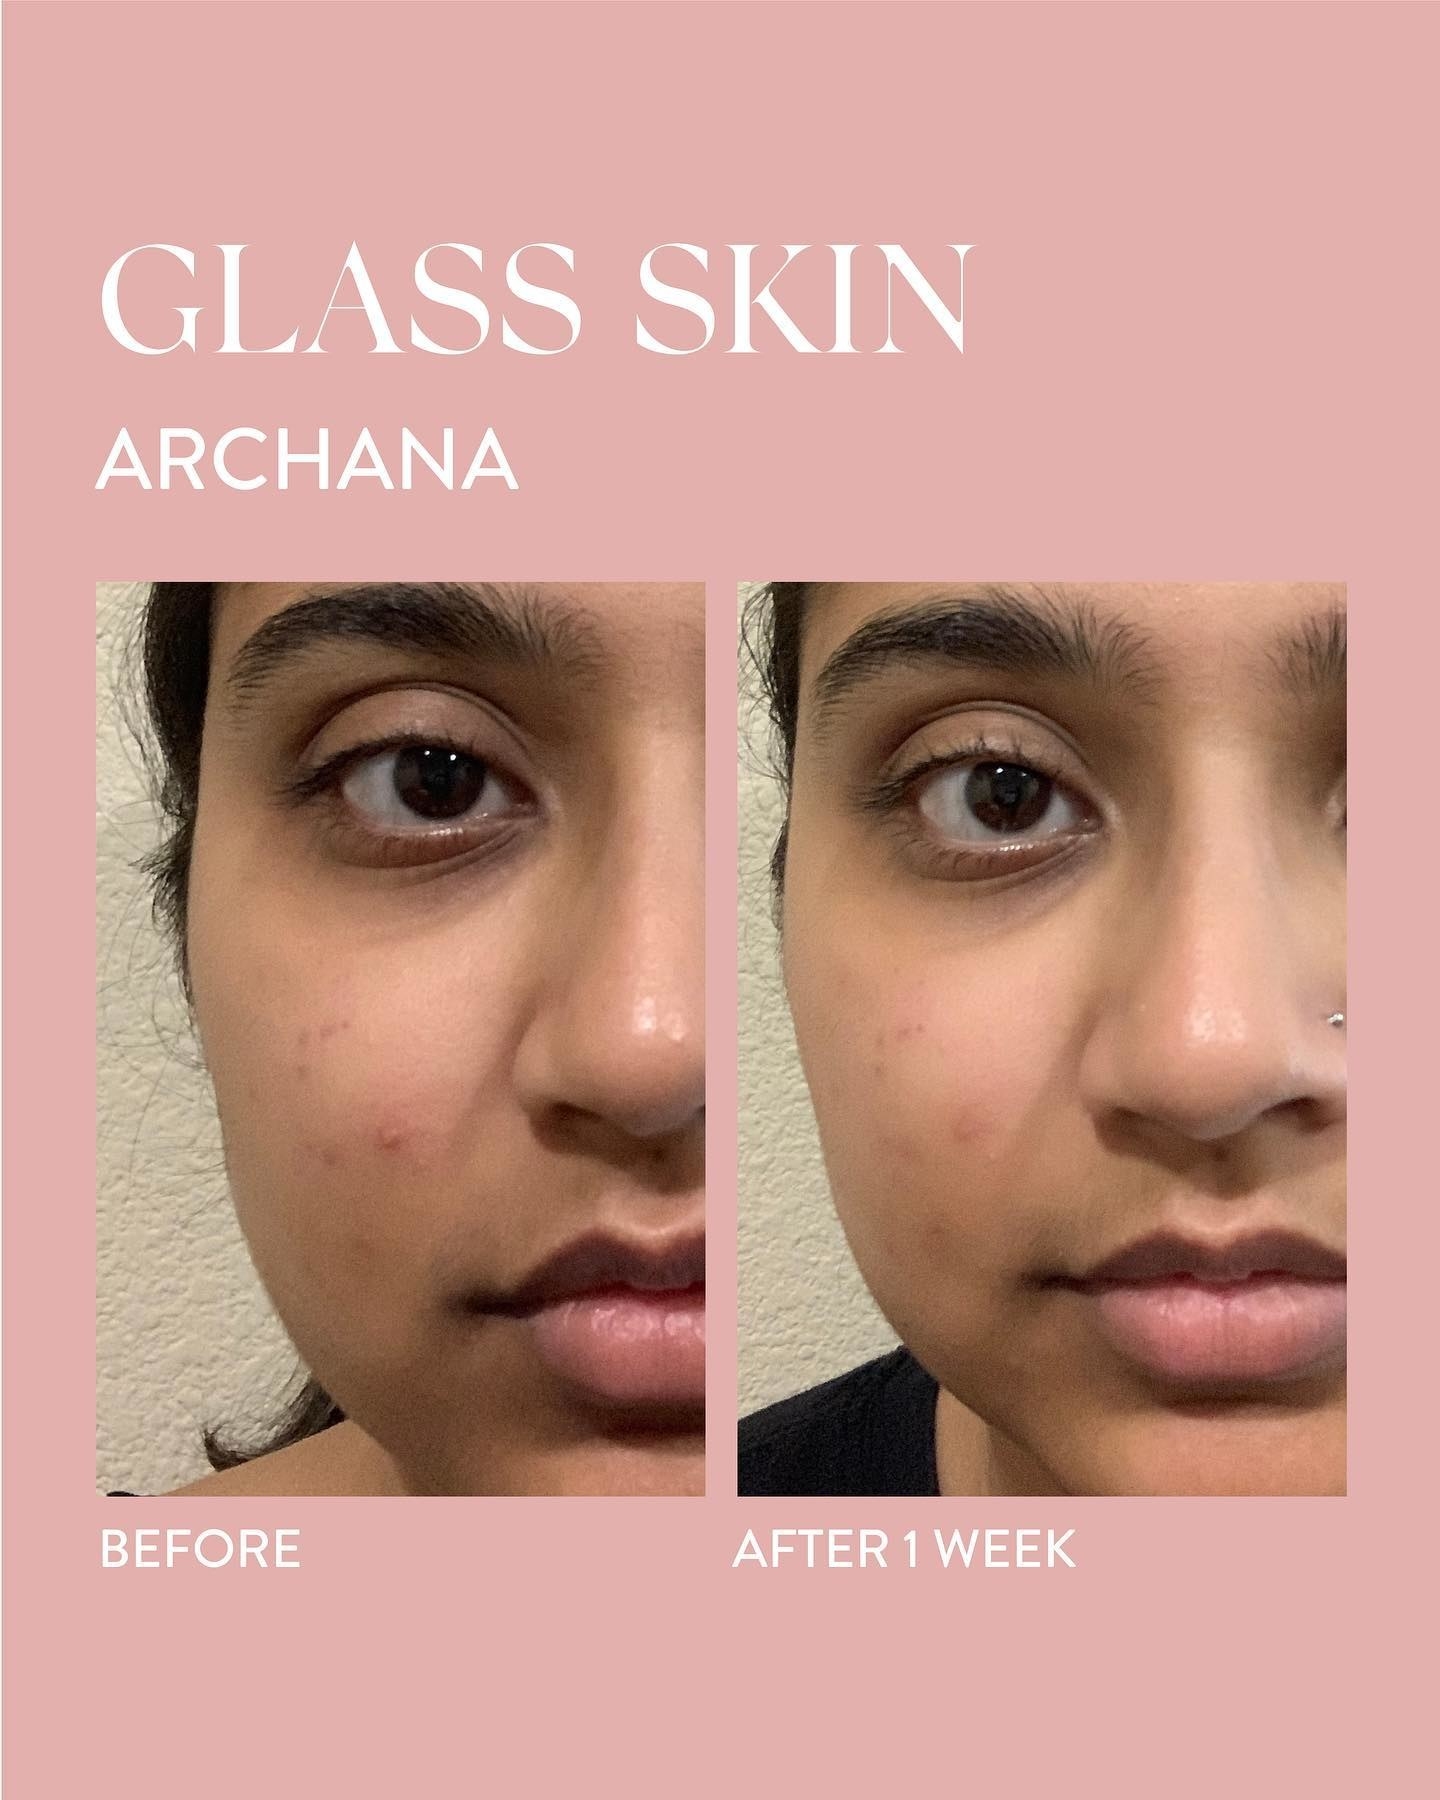 31 Skincare Products With Before & After Photos So Dramatic, We Made Them Click To Reveal